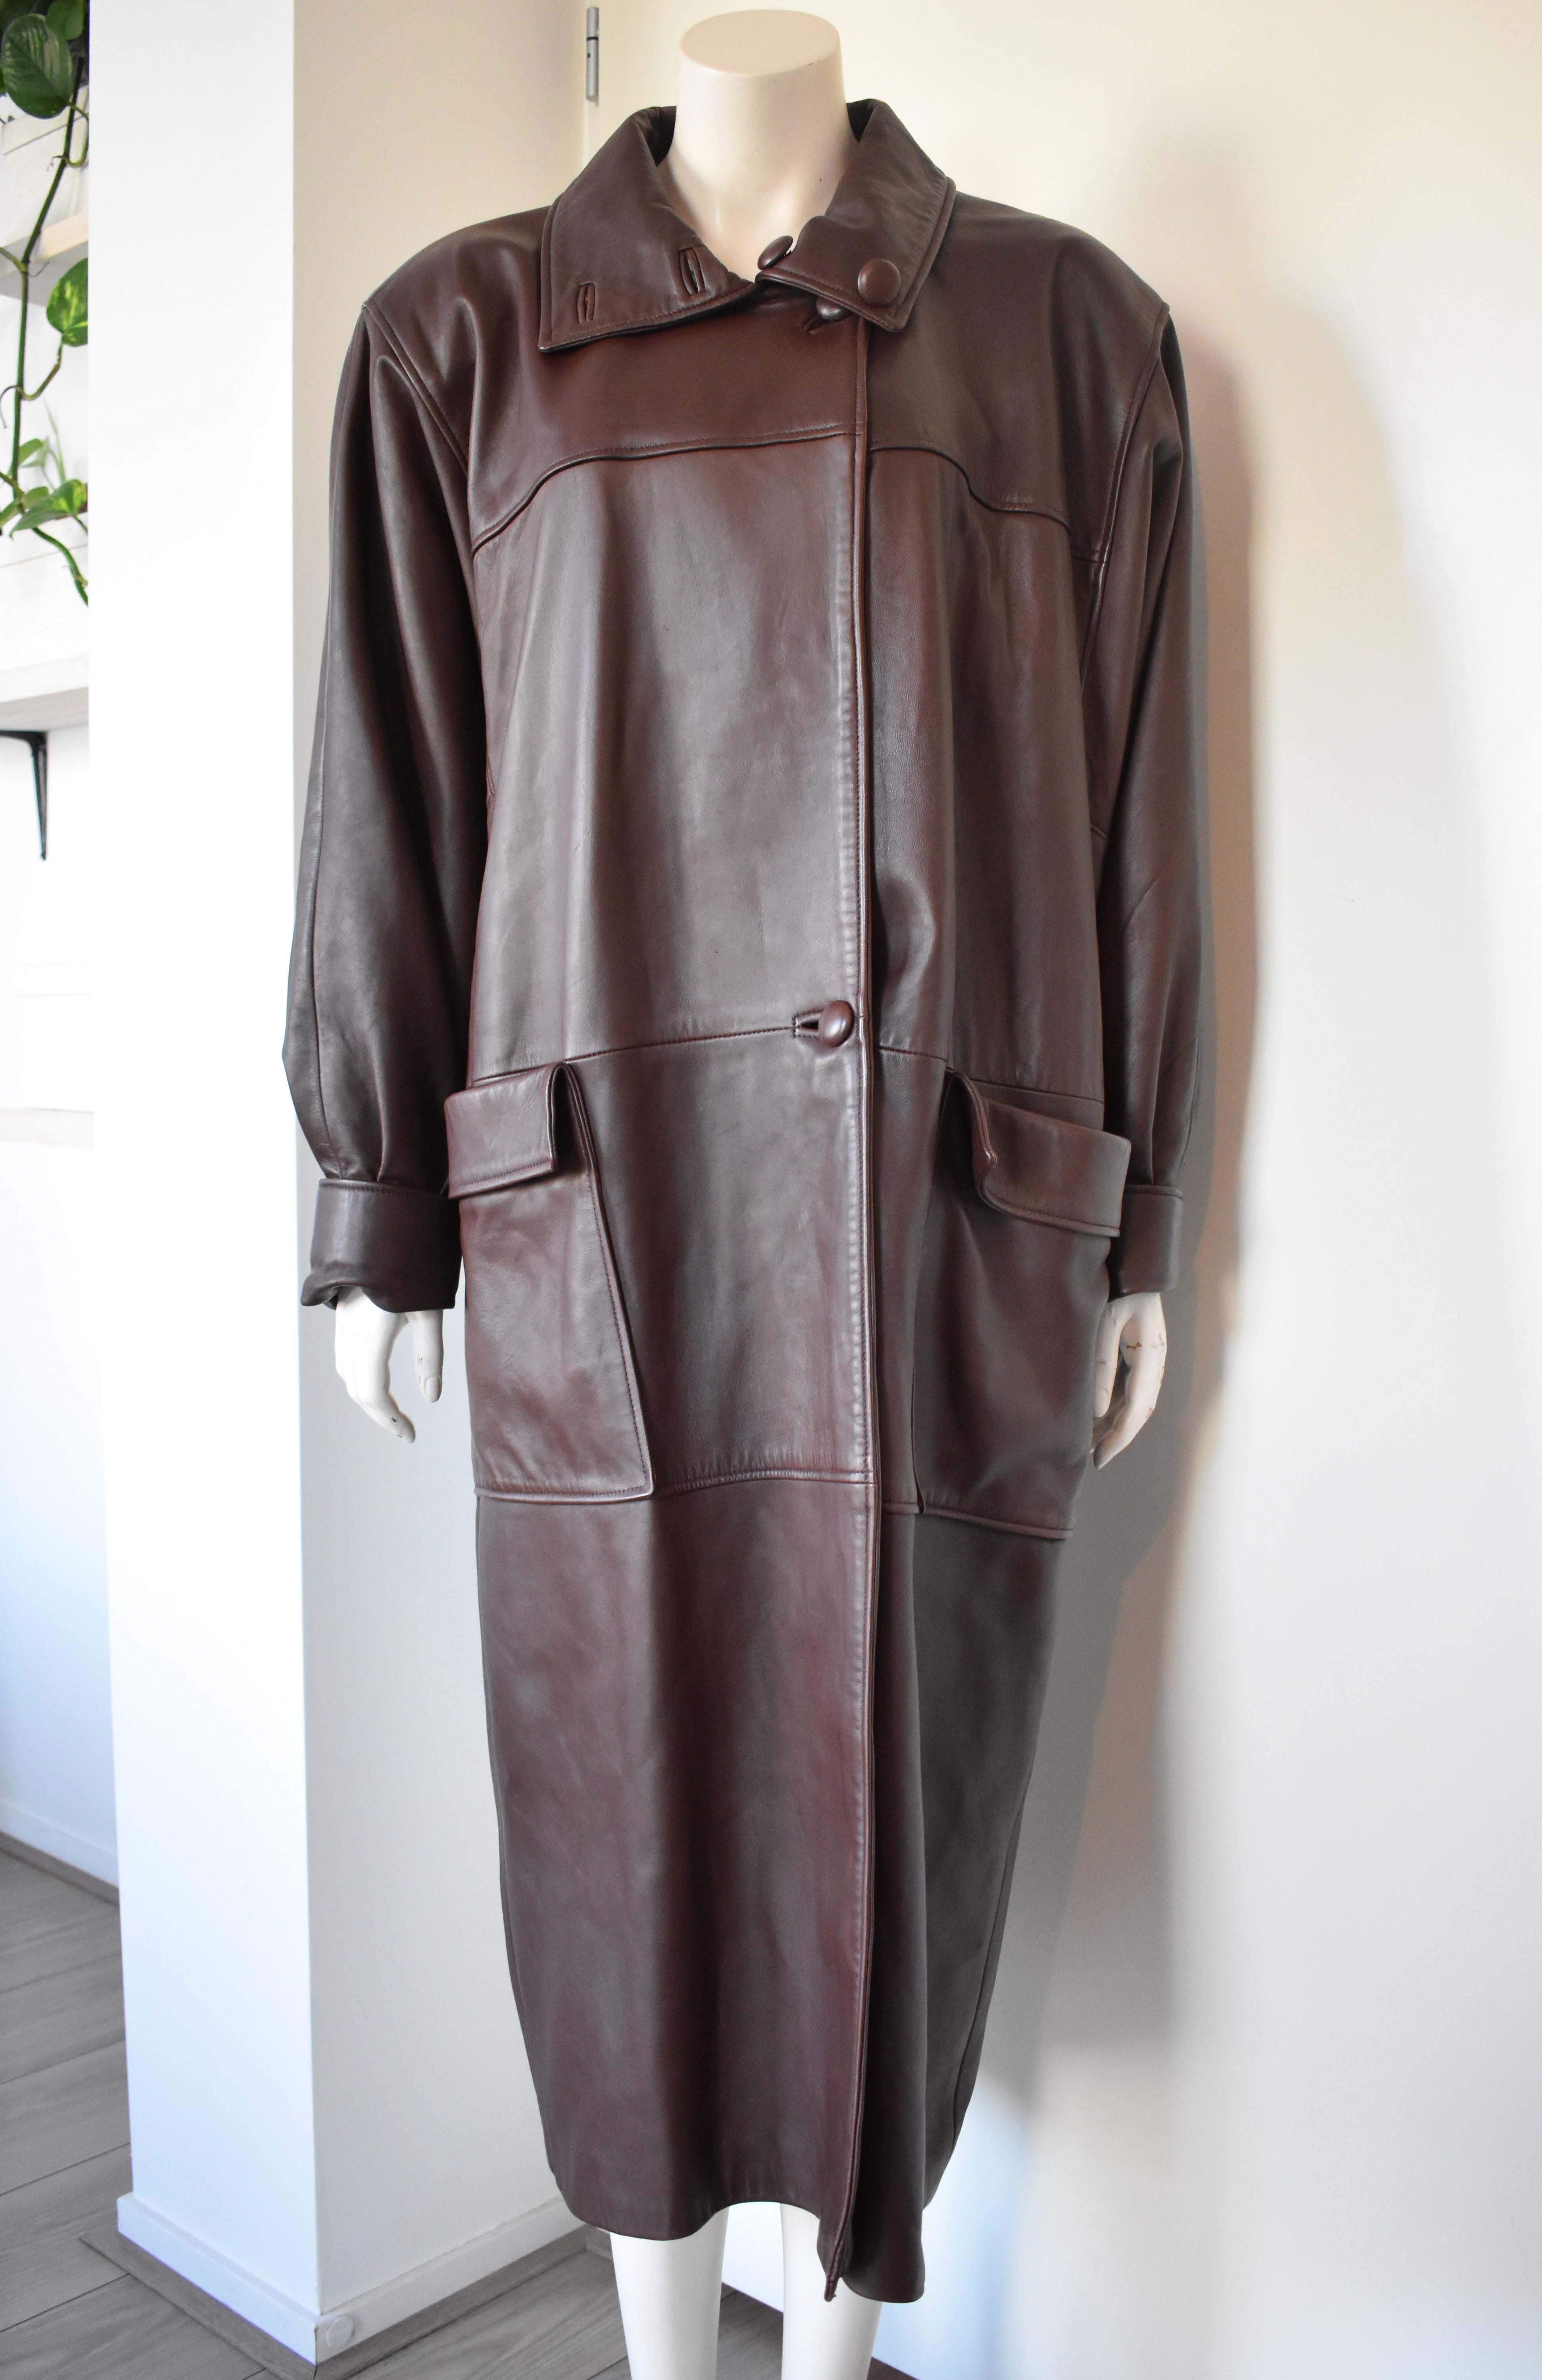 Stunning long coat made from very supple leather by Carven Paris. The coat is in a very good condition and has a spectacular lining. Before shipping, the Coat will be sent to a specialist for a complementary dry cleaning, so it will be perfect and